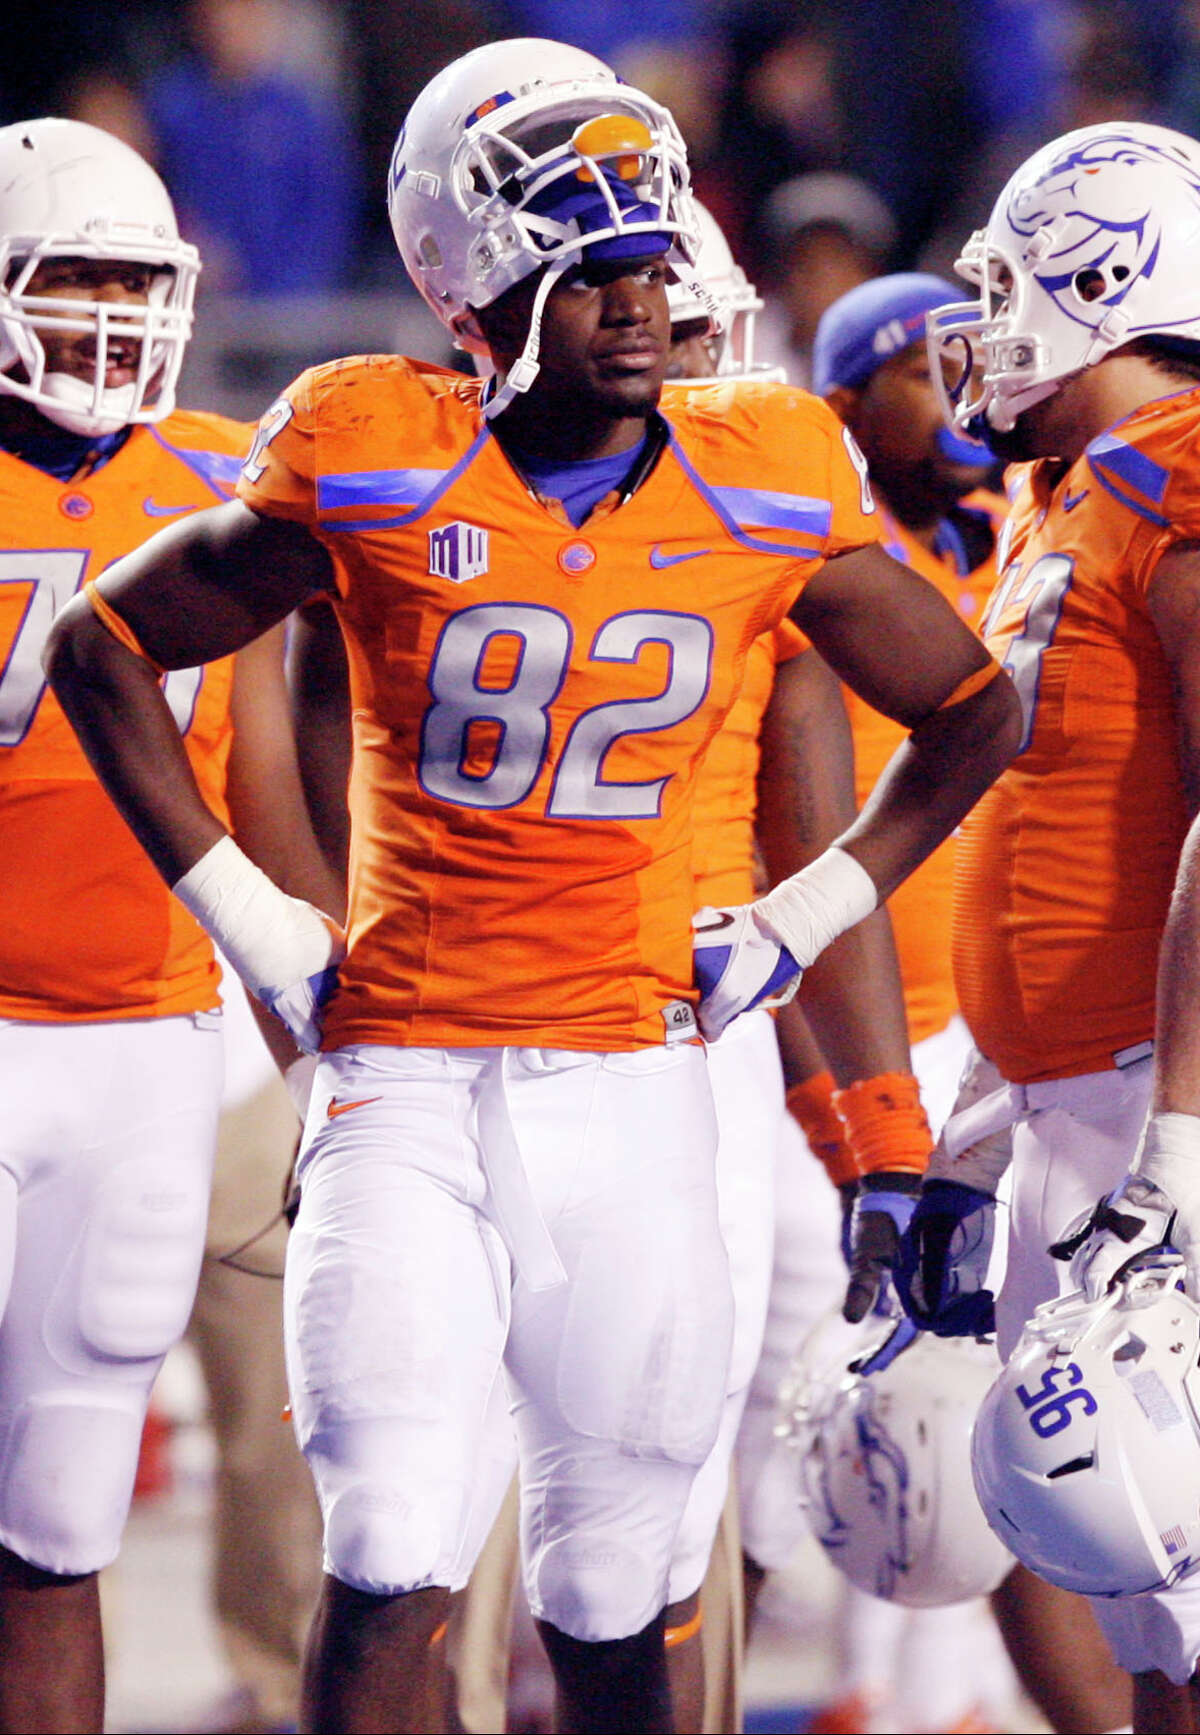 ﻿Then-Boise State ﻿football player Sam﻿ Ukwuachu ﻿watches from the sidelines﻿ in 2012.